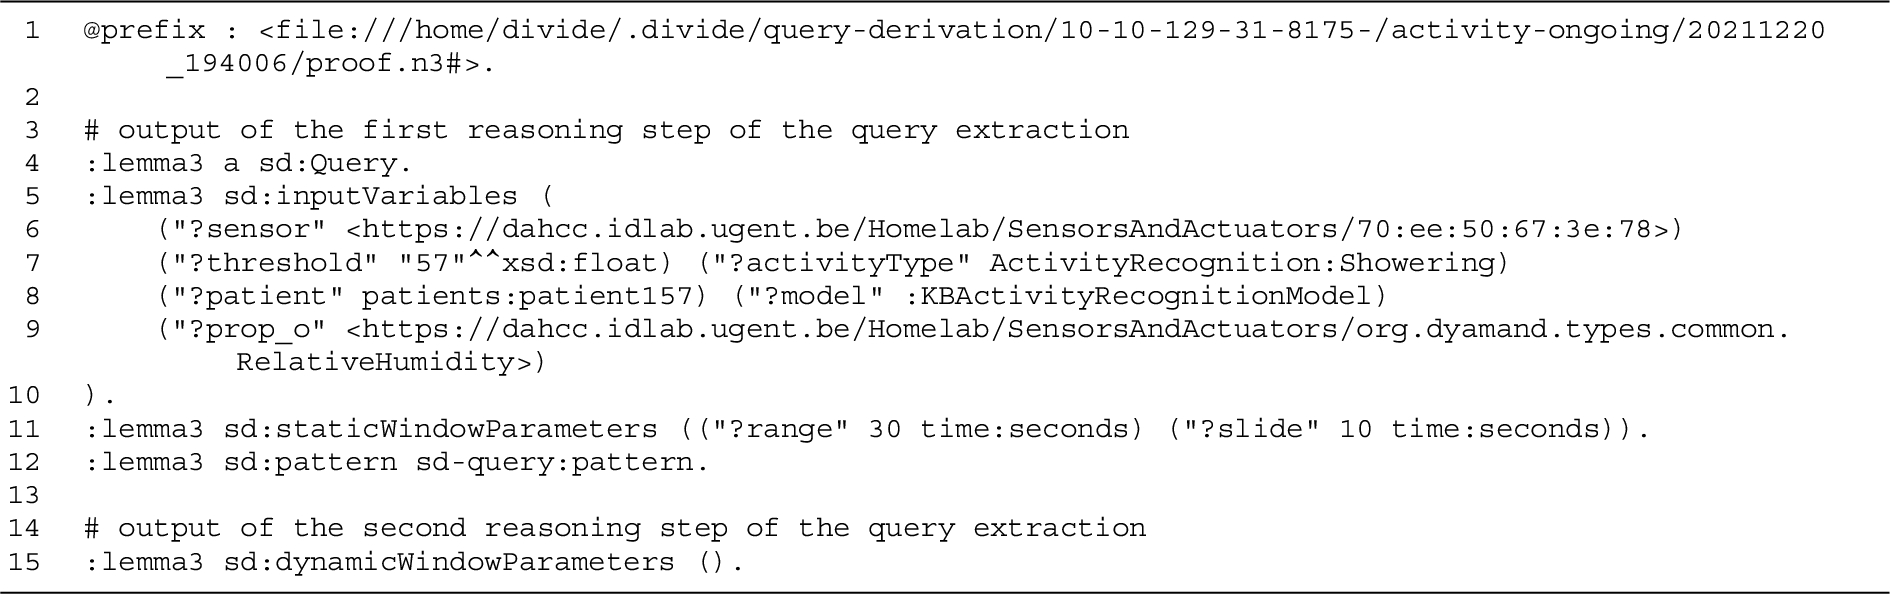 Output of the query extraction step of the DIVIDE query derivation, performed for the running example on the proof with a single sensor query rule instantiation presented in the proof step of Listing 4. The extraction of the dynamic window parameters (line 15) is done on the enriched context outputted by the context enrichment step.